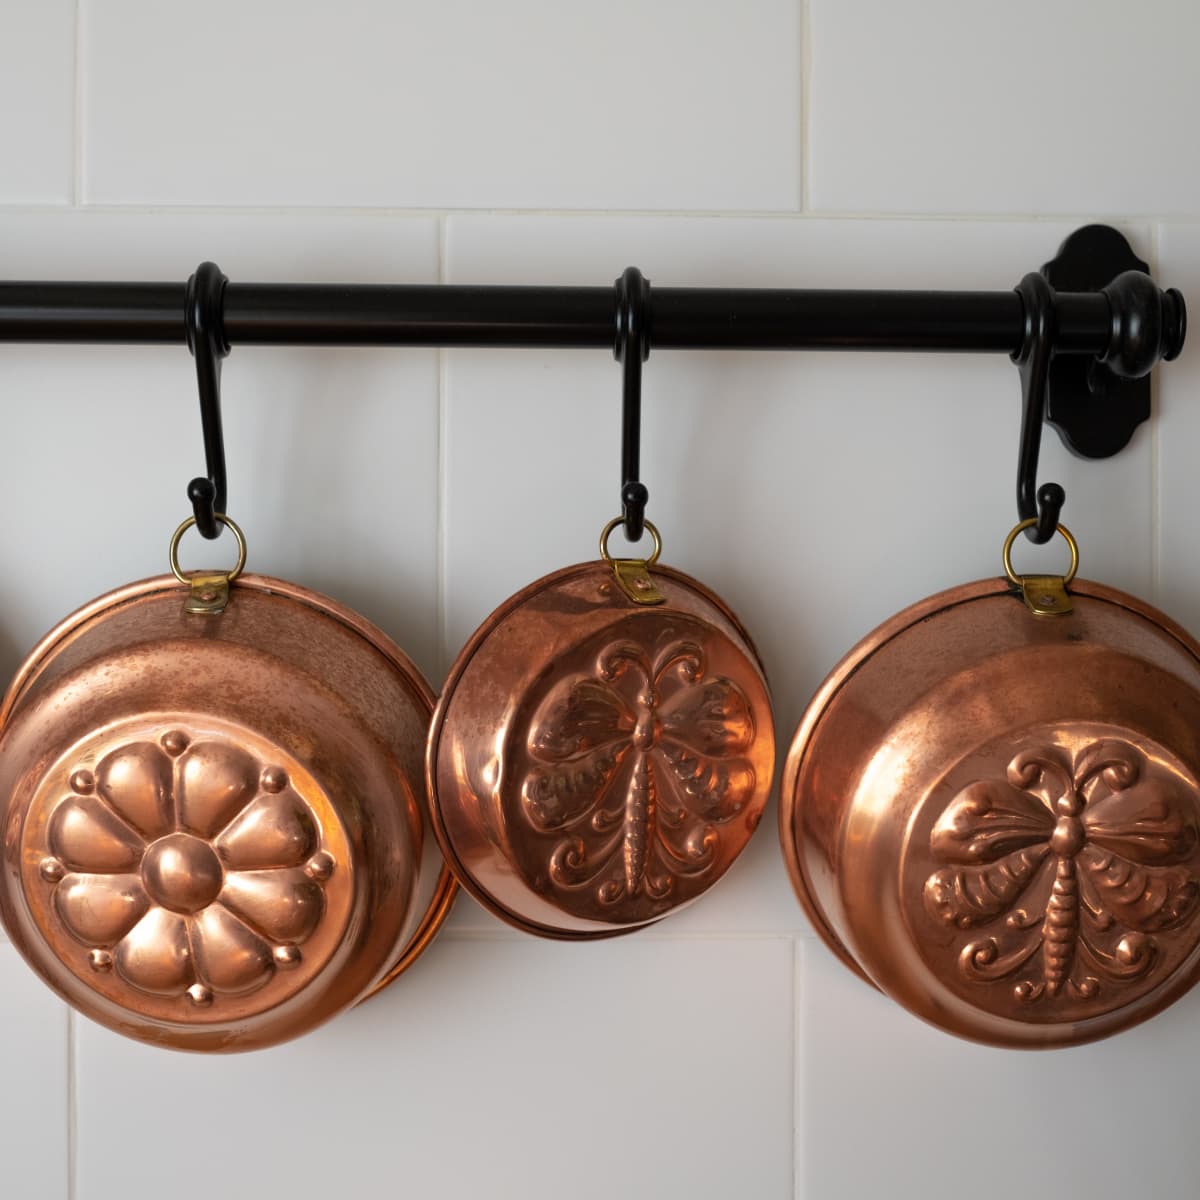 How to Clean Copper and Brass Without Chemicals - Dengarden